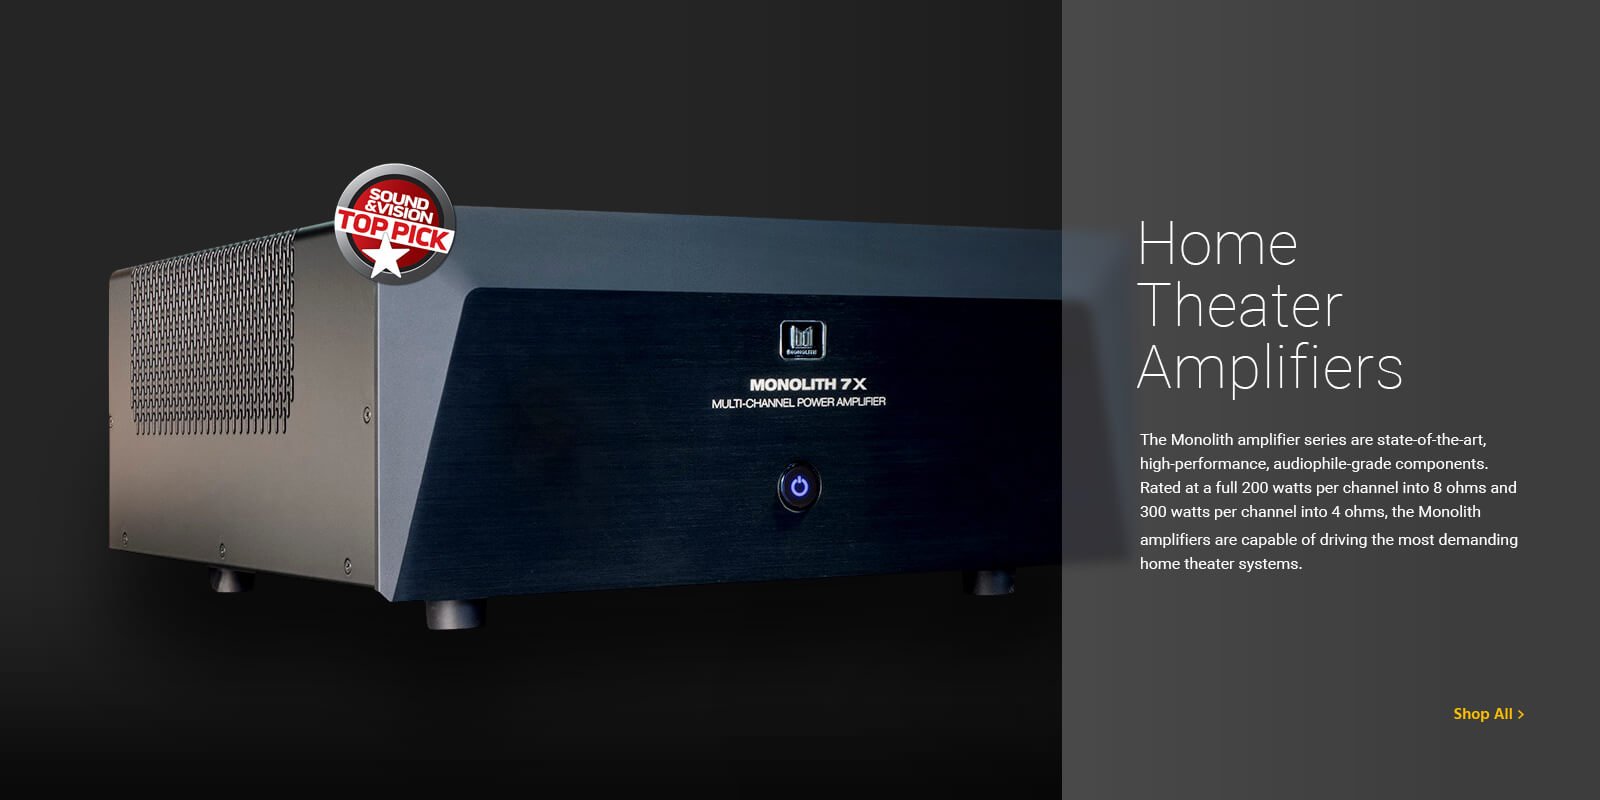 Home Theater Amplifiers, The monolith amplifier series are state-of-the-art, high performance, audiophile-grade components. Reted at a full 200 watts per channel into 8 ohms and 300 watts per channel into 4 ohms, the Monolith amplifiers are capable of driving the most demanding home theater systems. Shop All